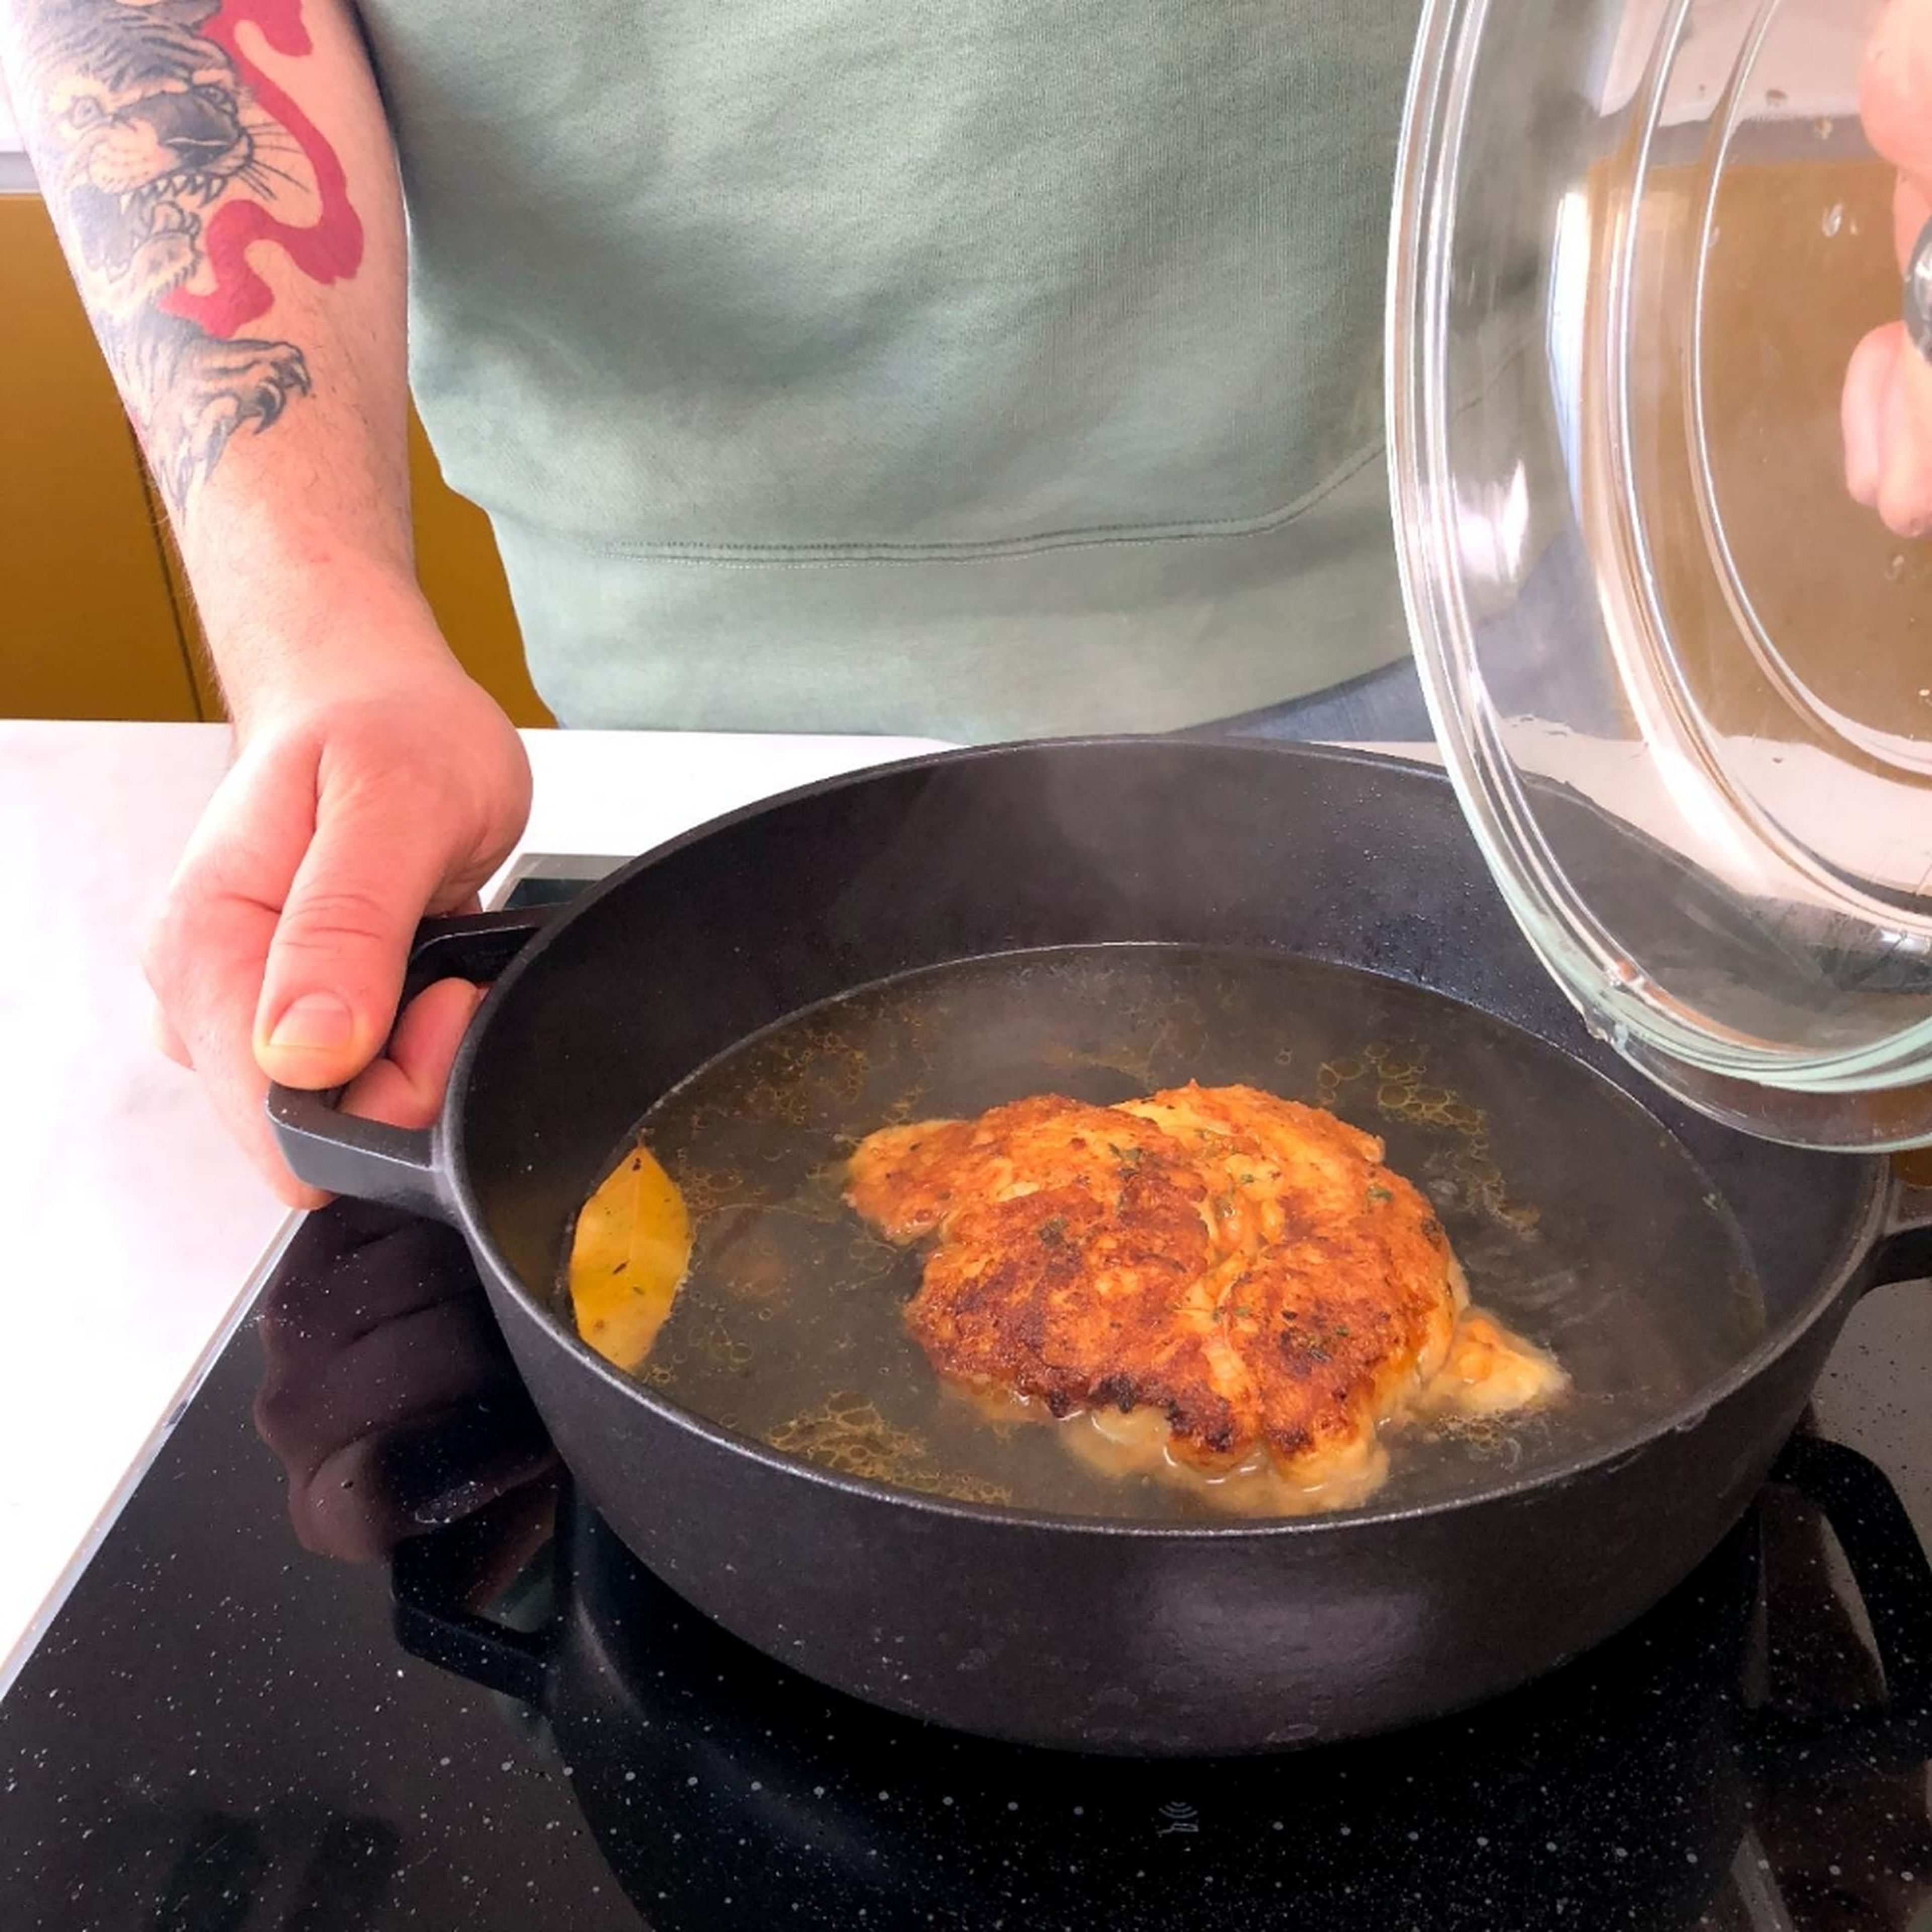 In a frying pan over medium heat, fry the seitan on both sides. Deglaze with stock and add bay leaf. Cover and let cook over low heat for approx. 40 min.